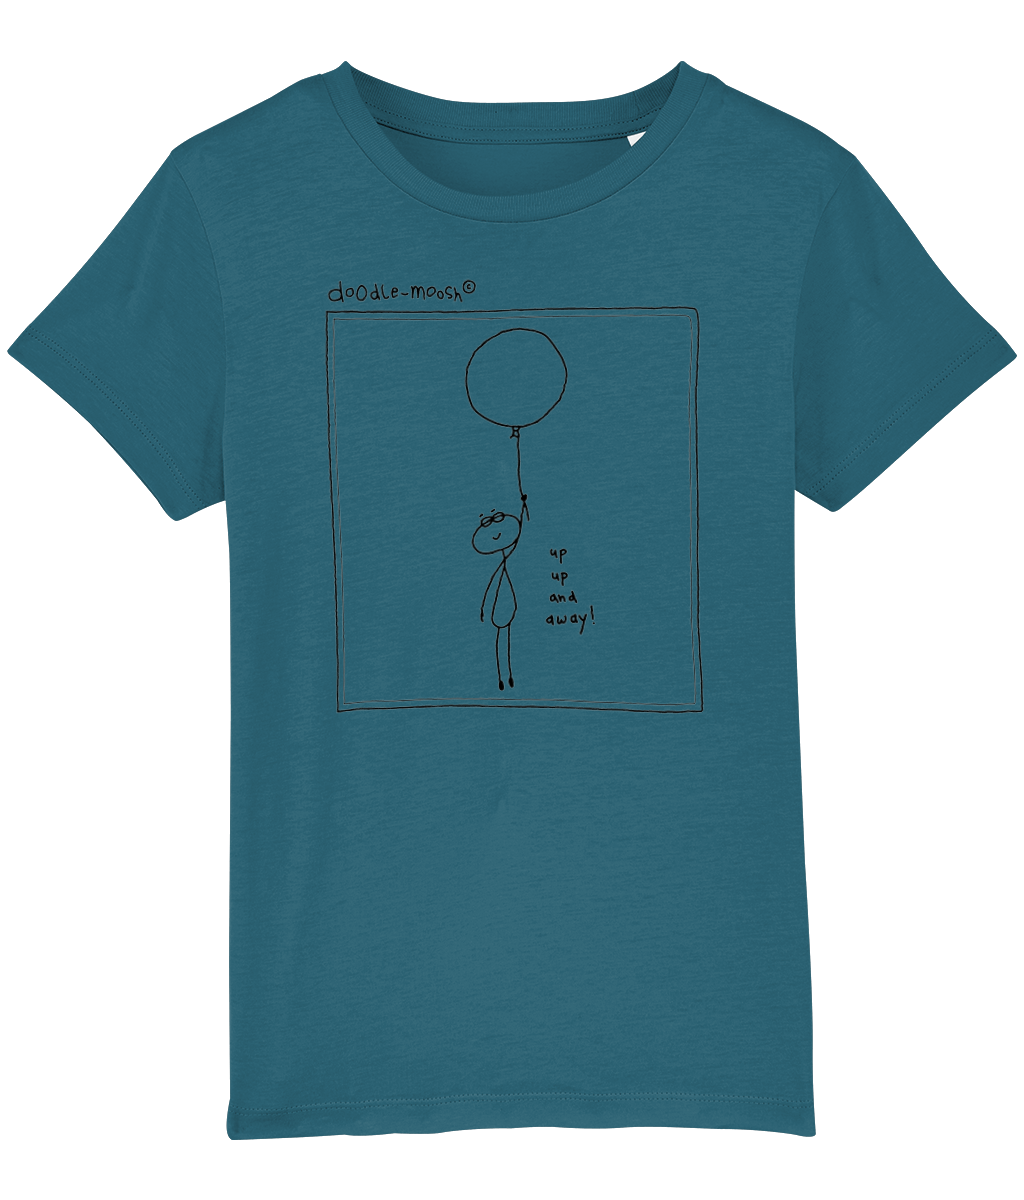 Up up and away t-shirt, blue with black